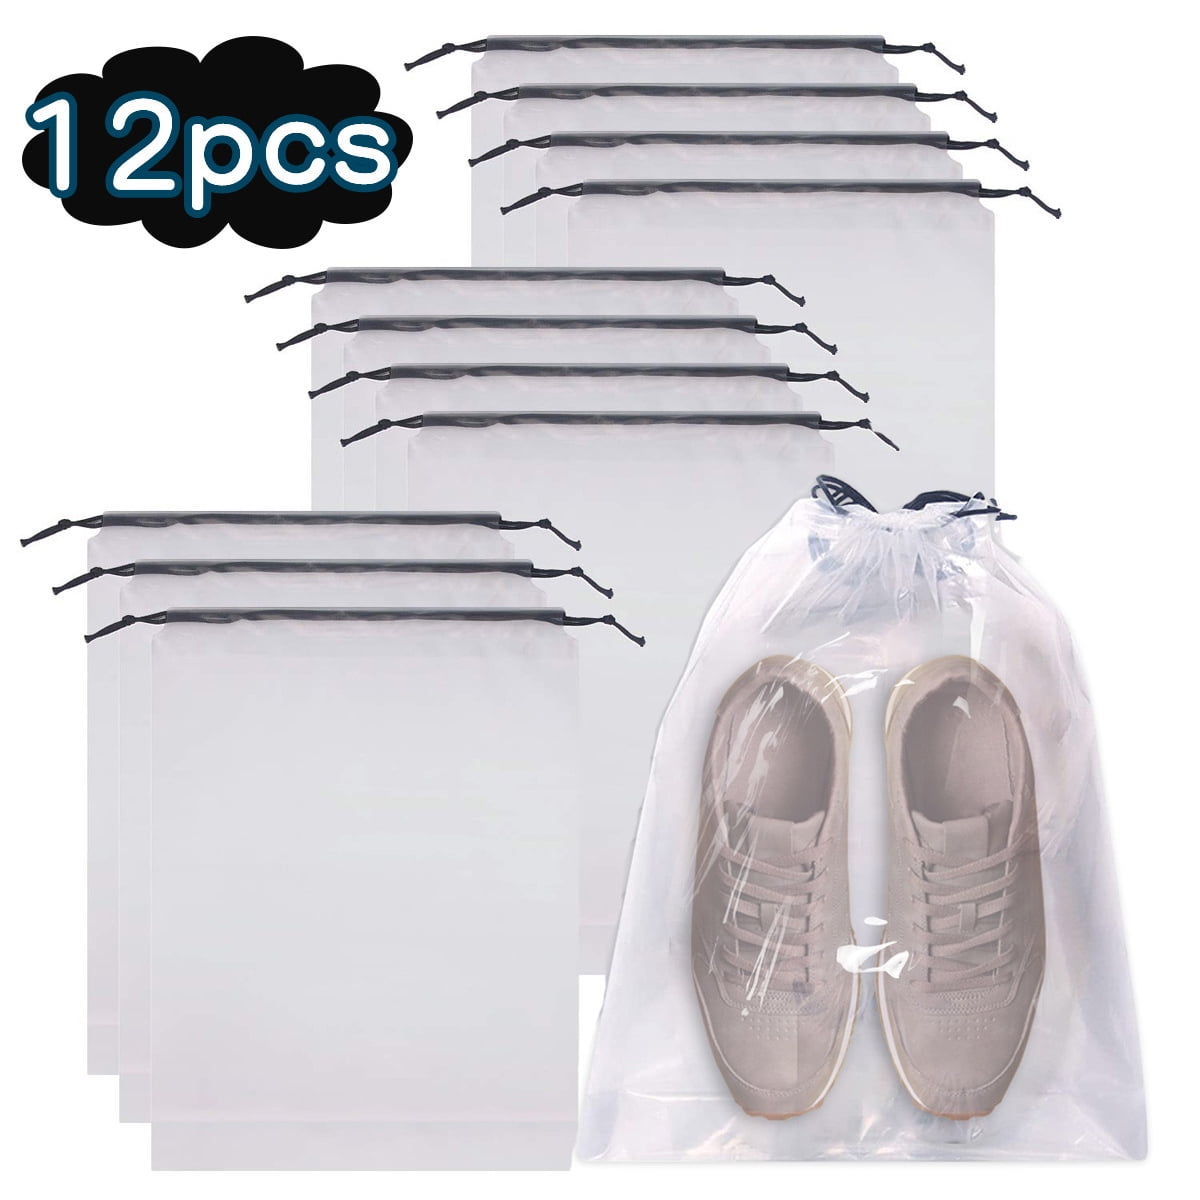 Kabuer Transparent Shoe Bags for Travel Large Clear Shoes Storage Organizers Travel Accessories 12 Pcs, Women's